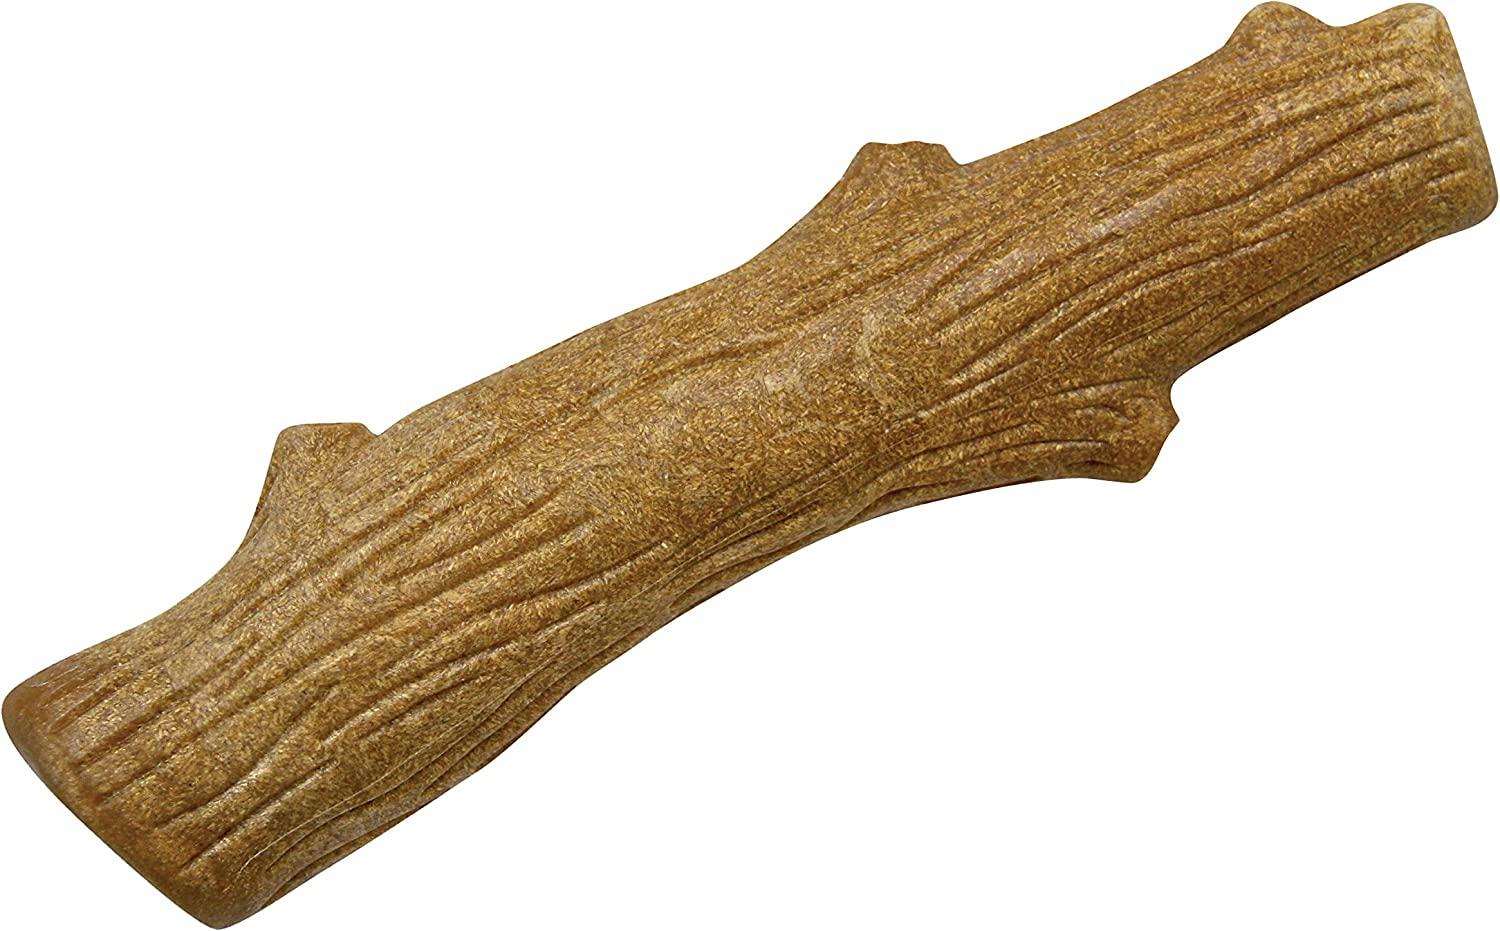 Petstages Dogwood Wood Alternative Dog Chew Toy for $5.22